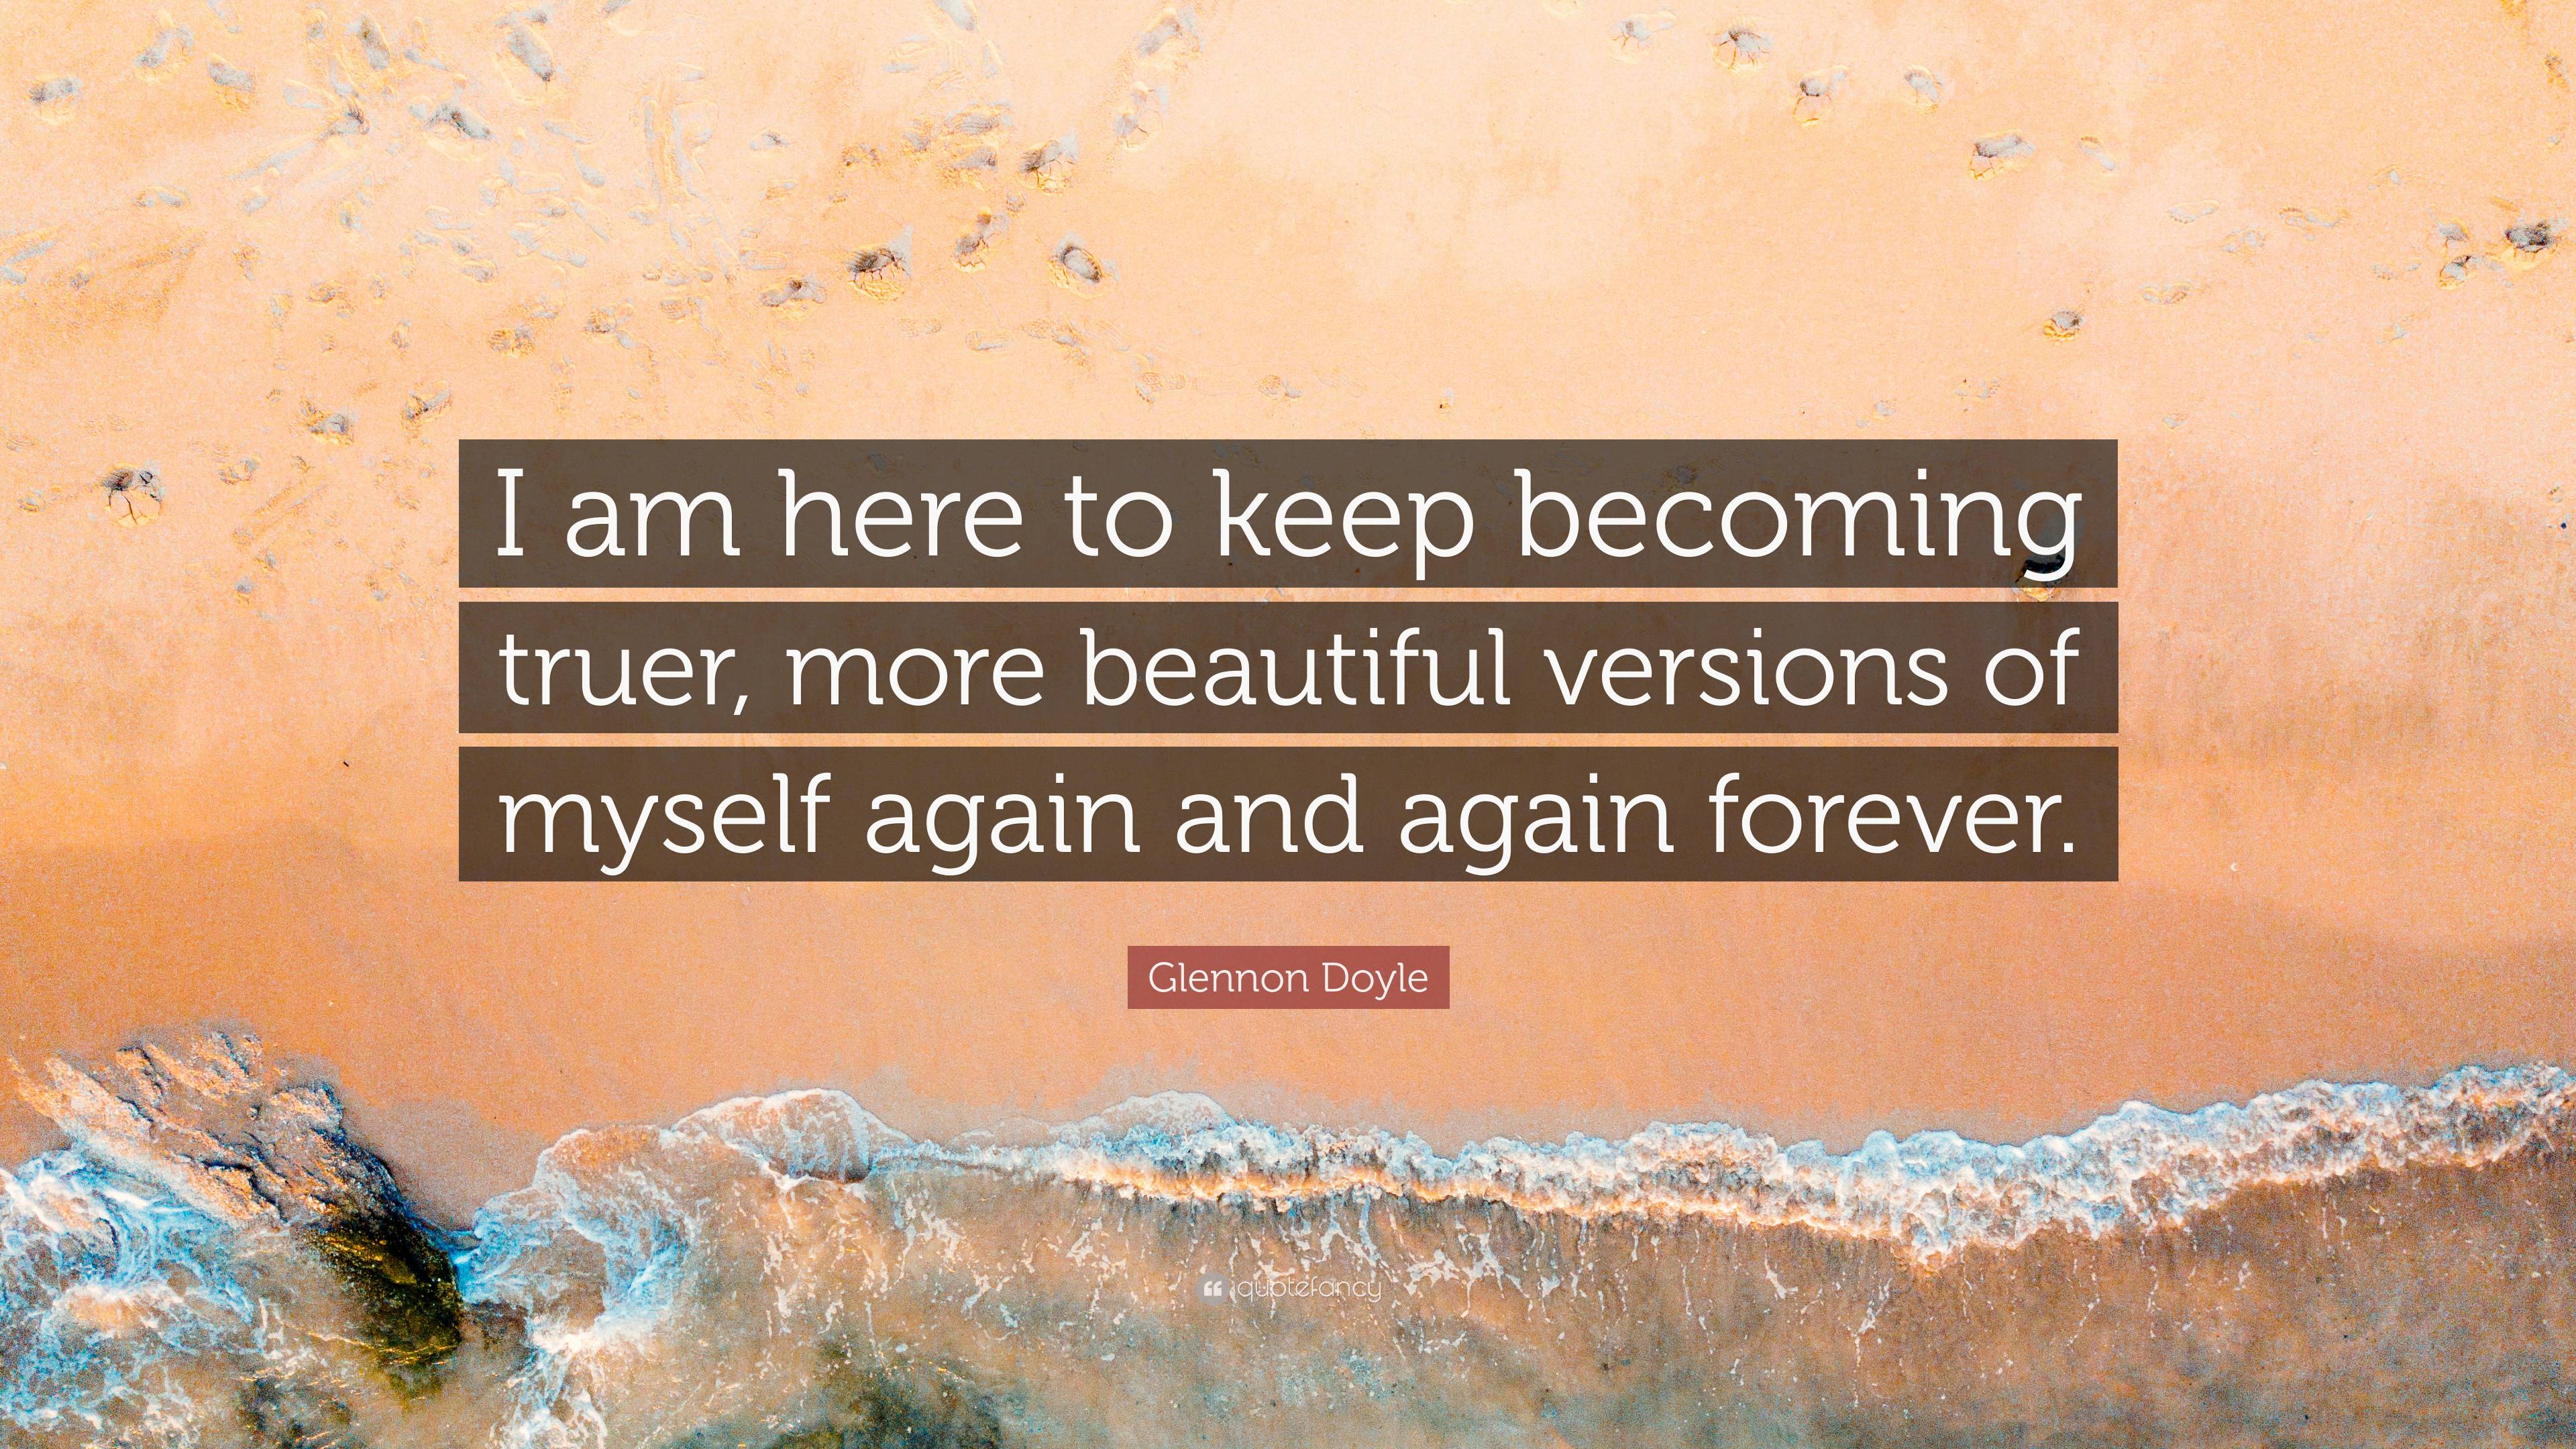 Glennon Doyle Quote: “I am here to keep becoming truer, more